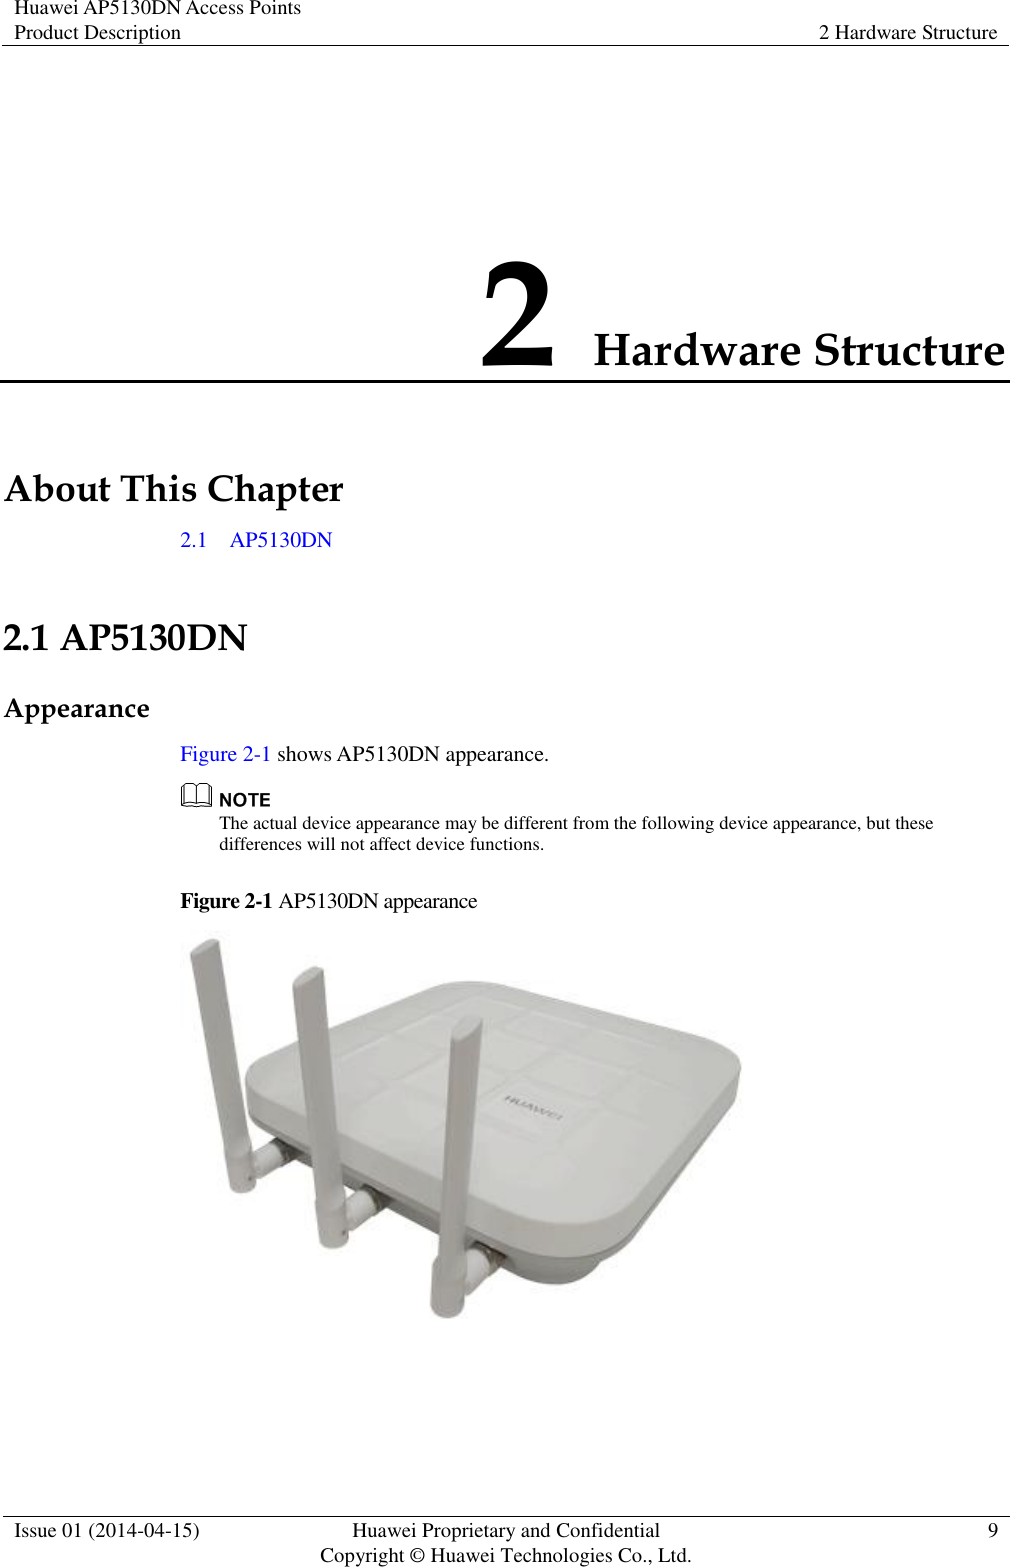 Huawei AP5130DN Access Points Product Description 2 Hardware Structure  Issue 01 (2014-04-15) Huawei Proprietary and Confidential                                     Copyright © Huawei Technologies Co., Ltd. 9  2 Hardware Structure About This Chapter 2.1    AP5130DN 2.1 AP5130DN Appearance Figure 2-1 shows AP5130DN appearance.  The actual device appearance may be different from the following device appearance, but these differences will not affect device functions. Figure 2-1 AP5130DN appearance   